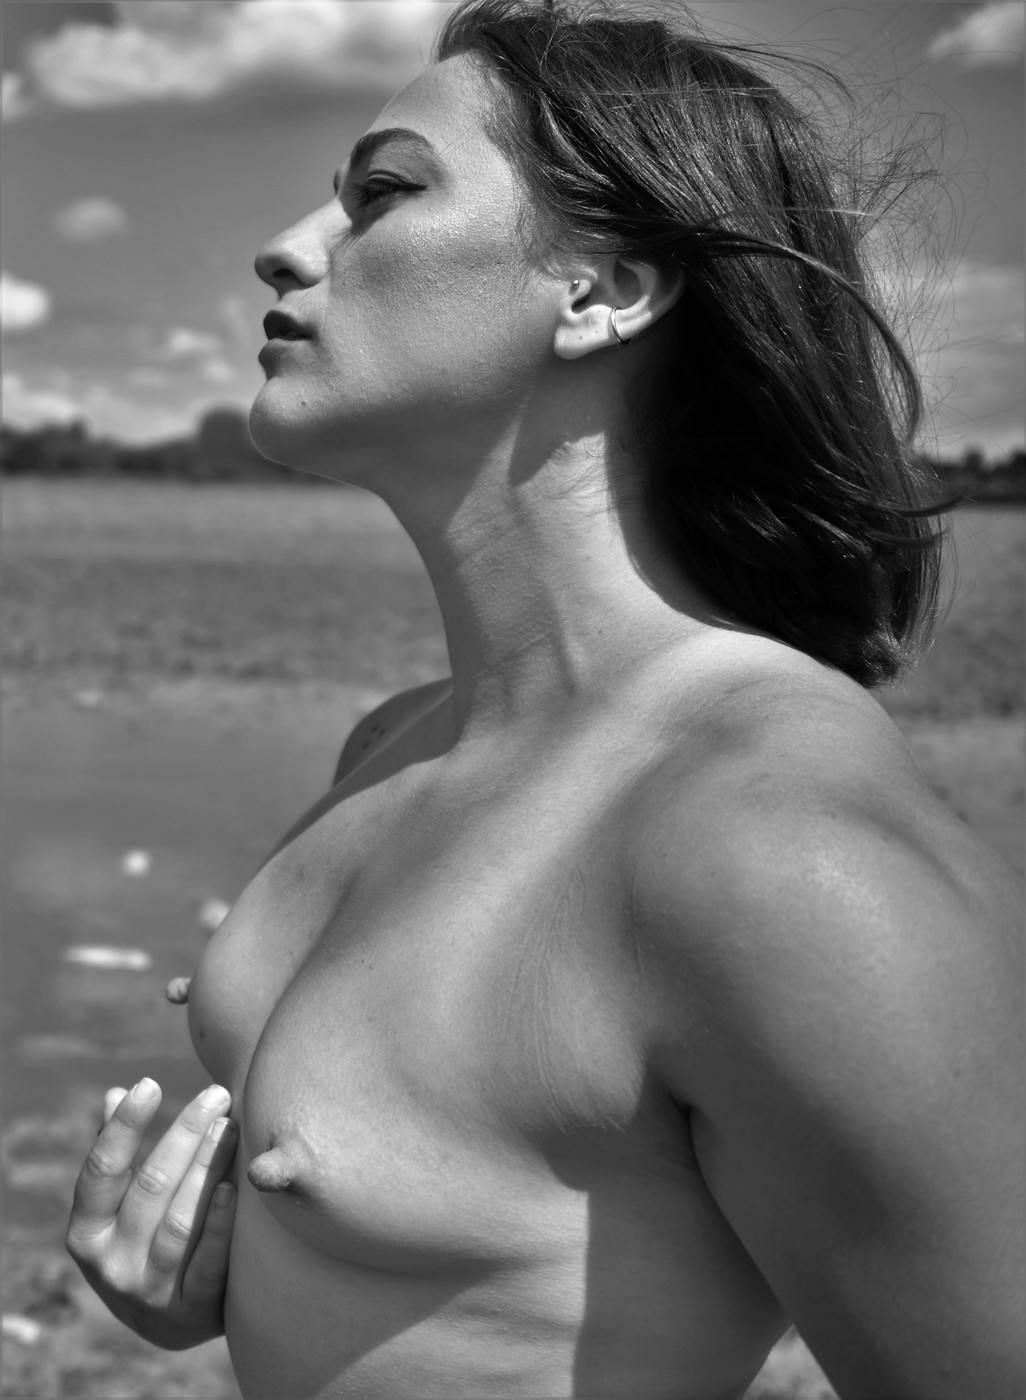 photographer FunPhotographer topless modelling photo taken at Port Meadow, ...